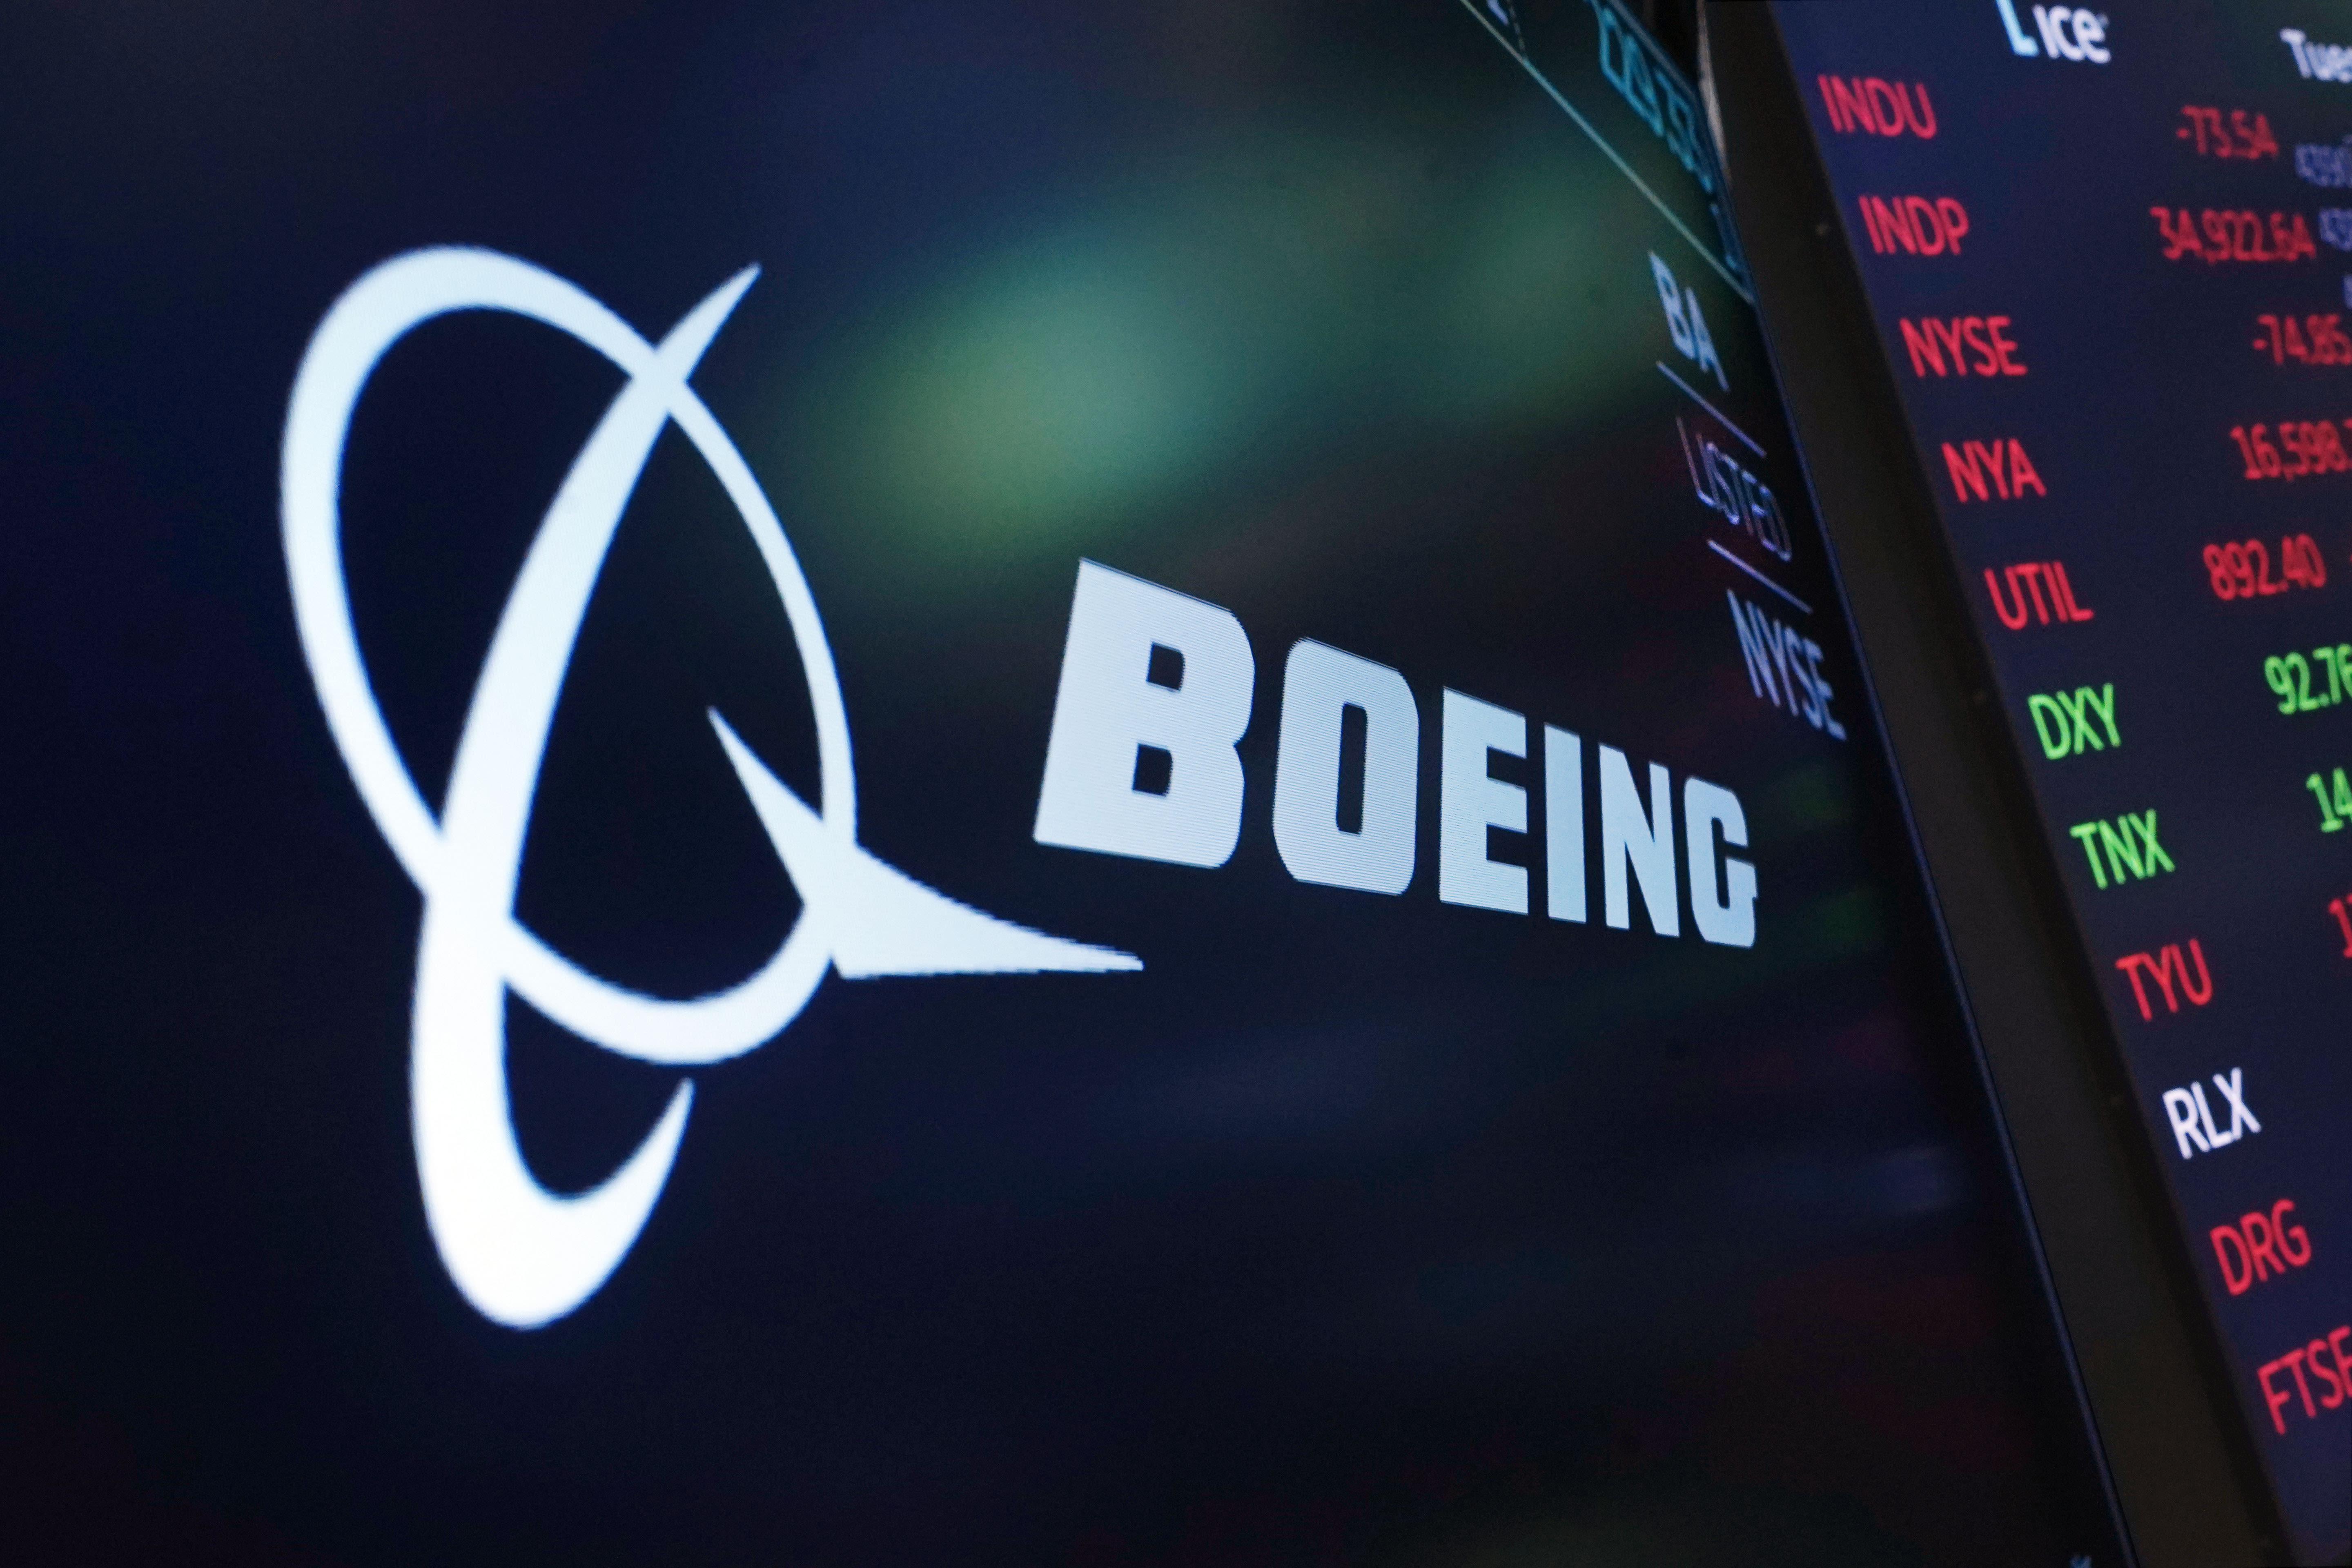 Boeing accepts plea deal to avoid criminal trial over 737 Max crashes